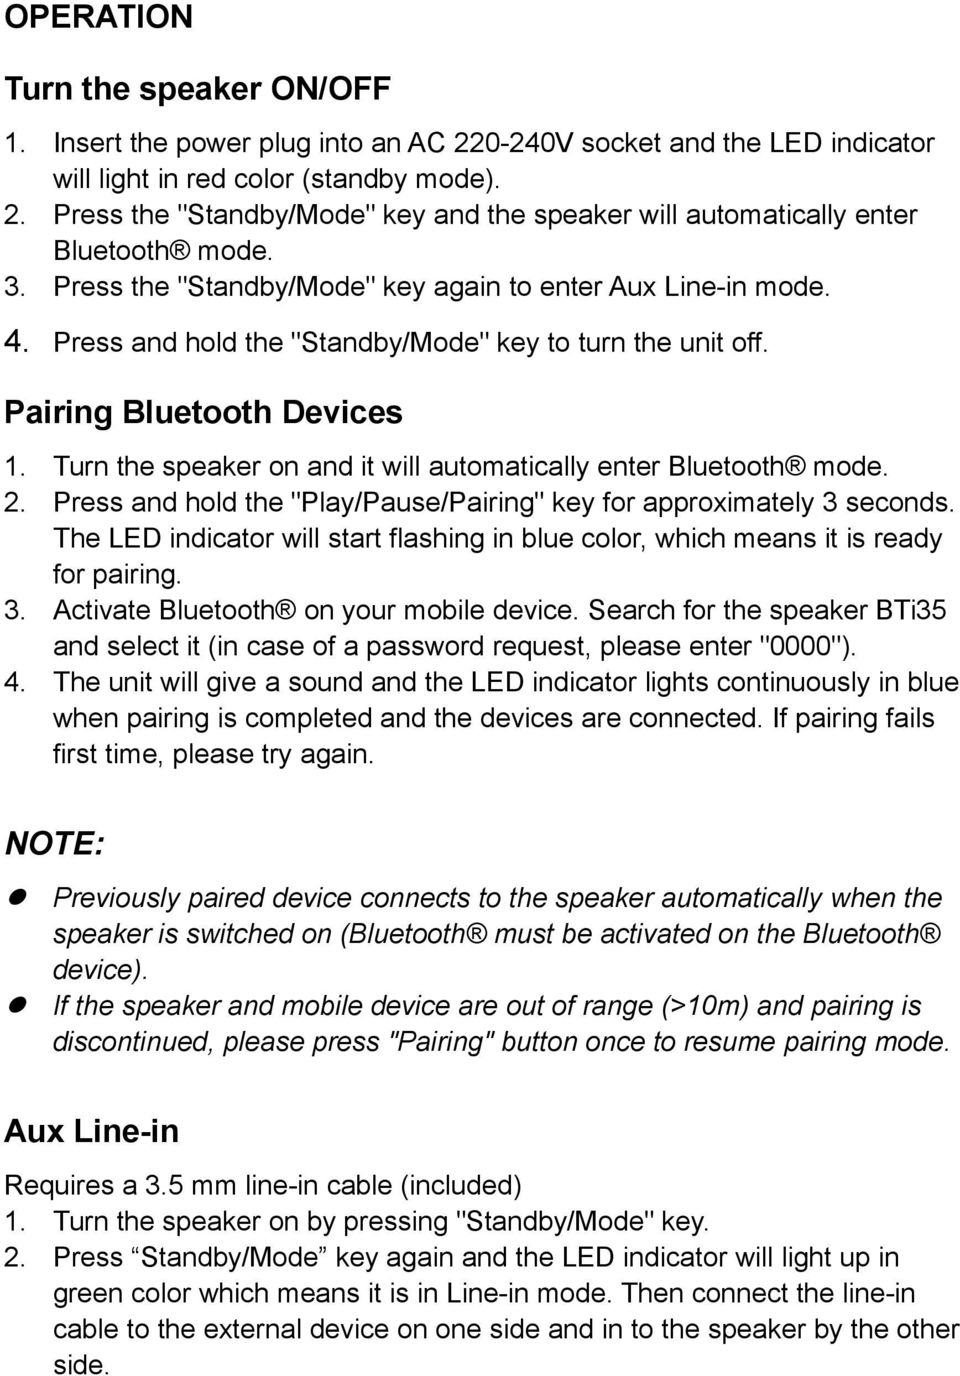 Turn the speaker on and it will automatically enter Bluetooth mode. 2. Press and hold the "Play/Pause/Pairing" key for approximately 3 seconds.